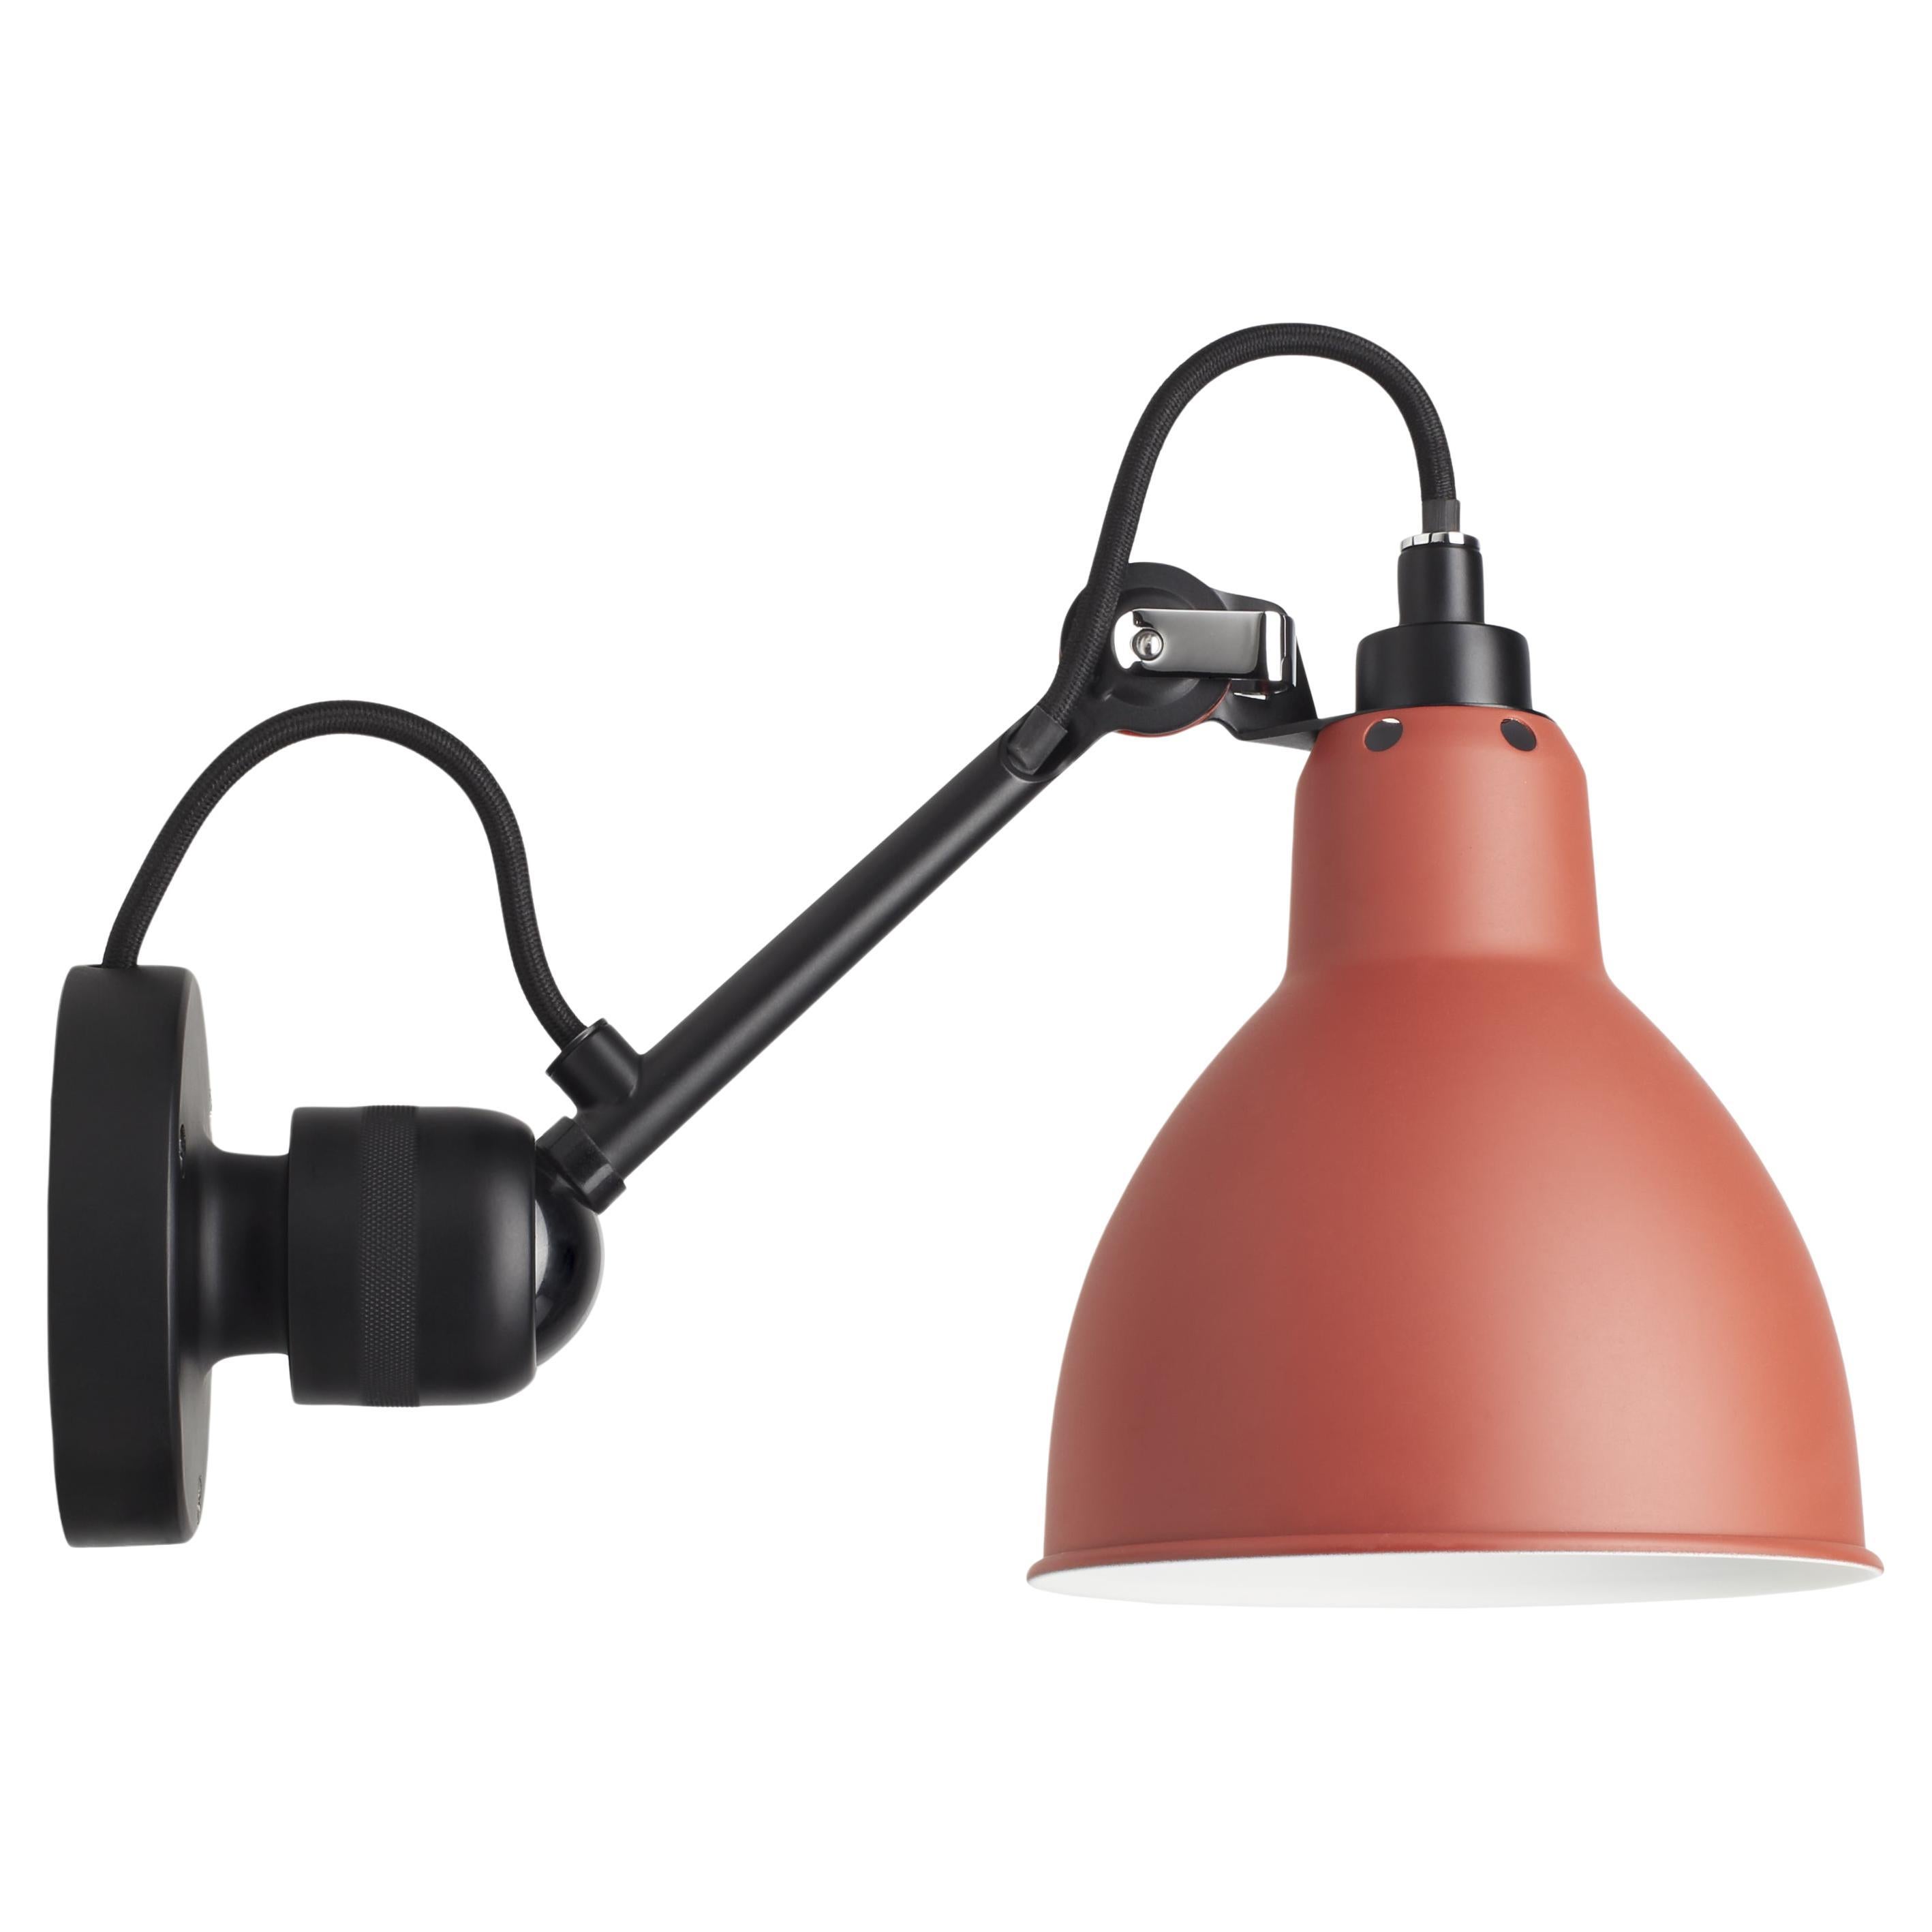 DCW Editions La Lampe Gras N°304 Wall Lamp in Black Arm and Red Shade